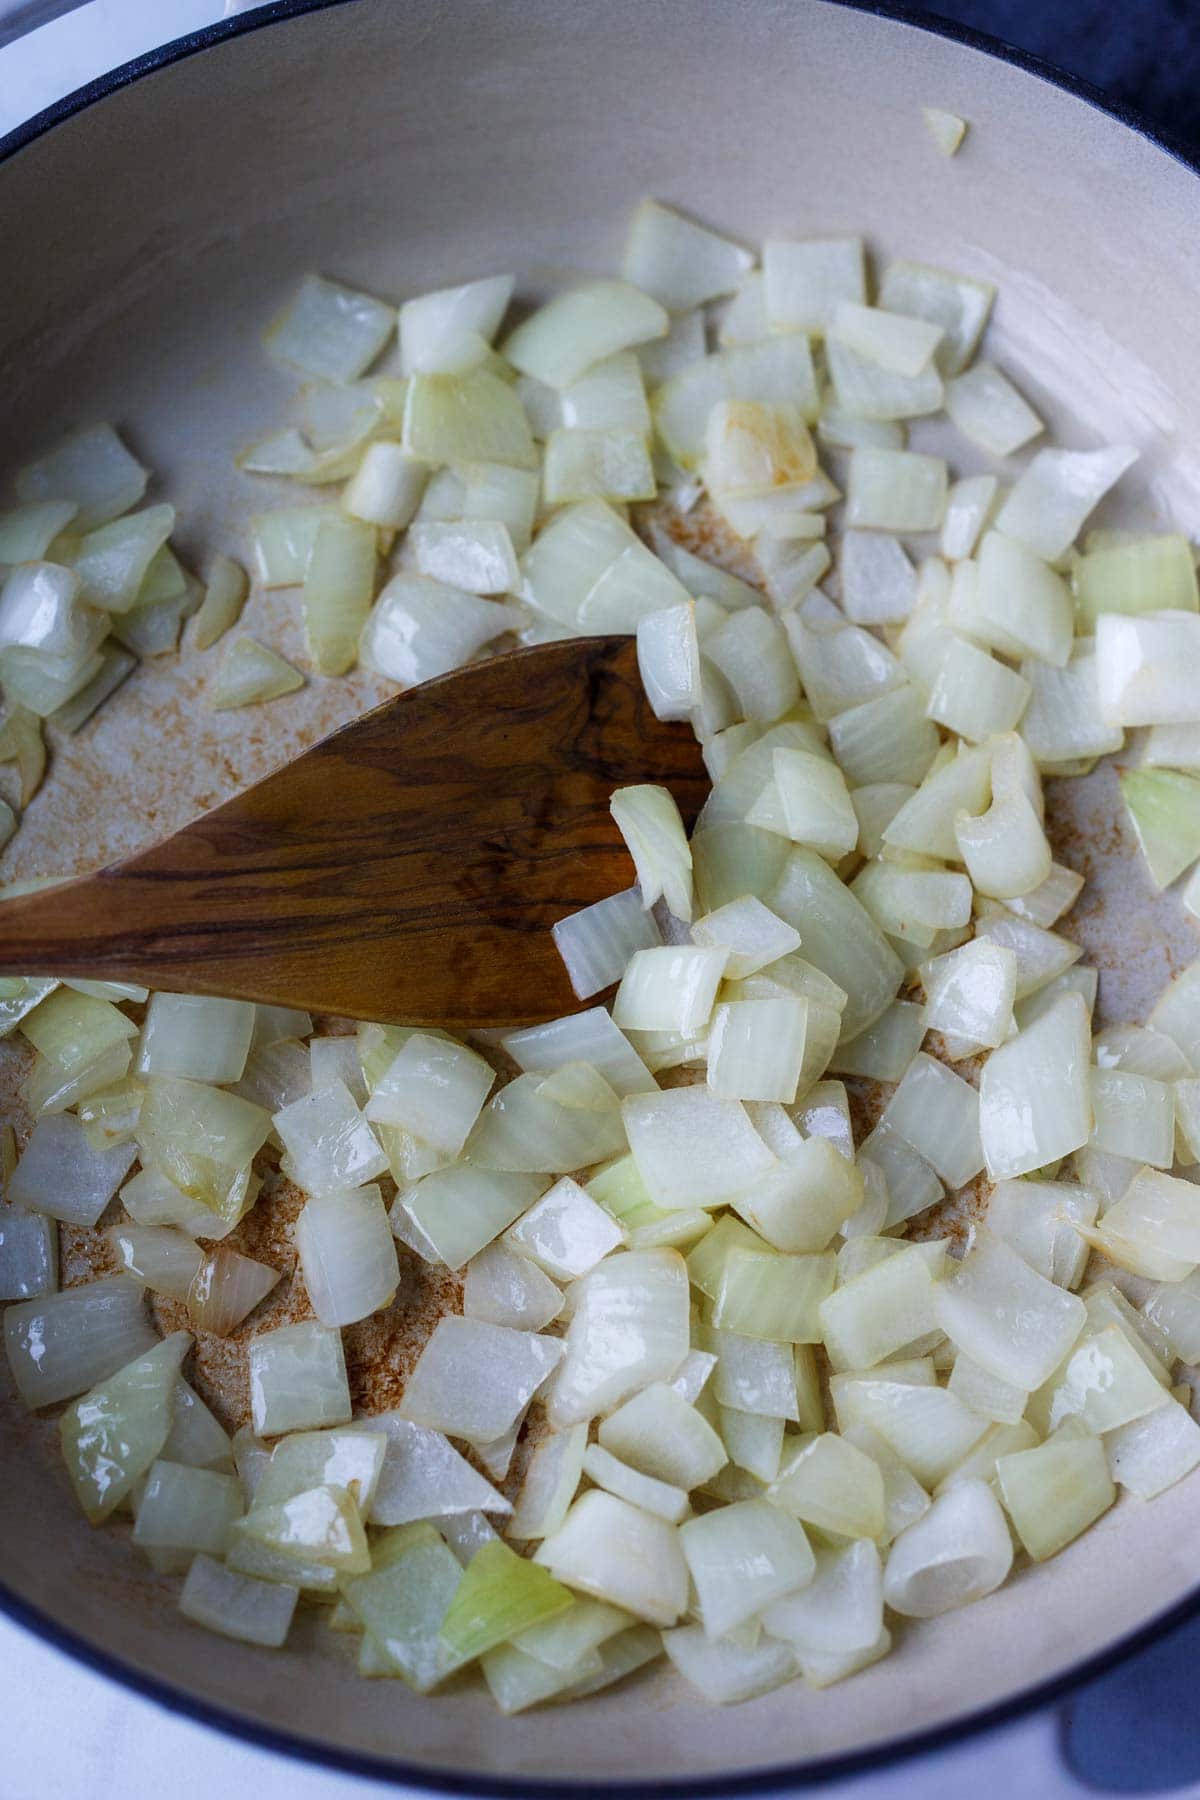 chopped onions sautéing in pan, stirred with wood spoon.